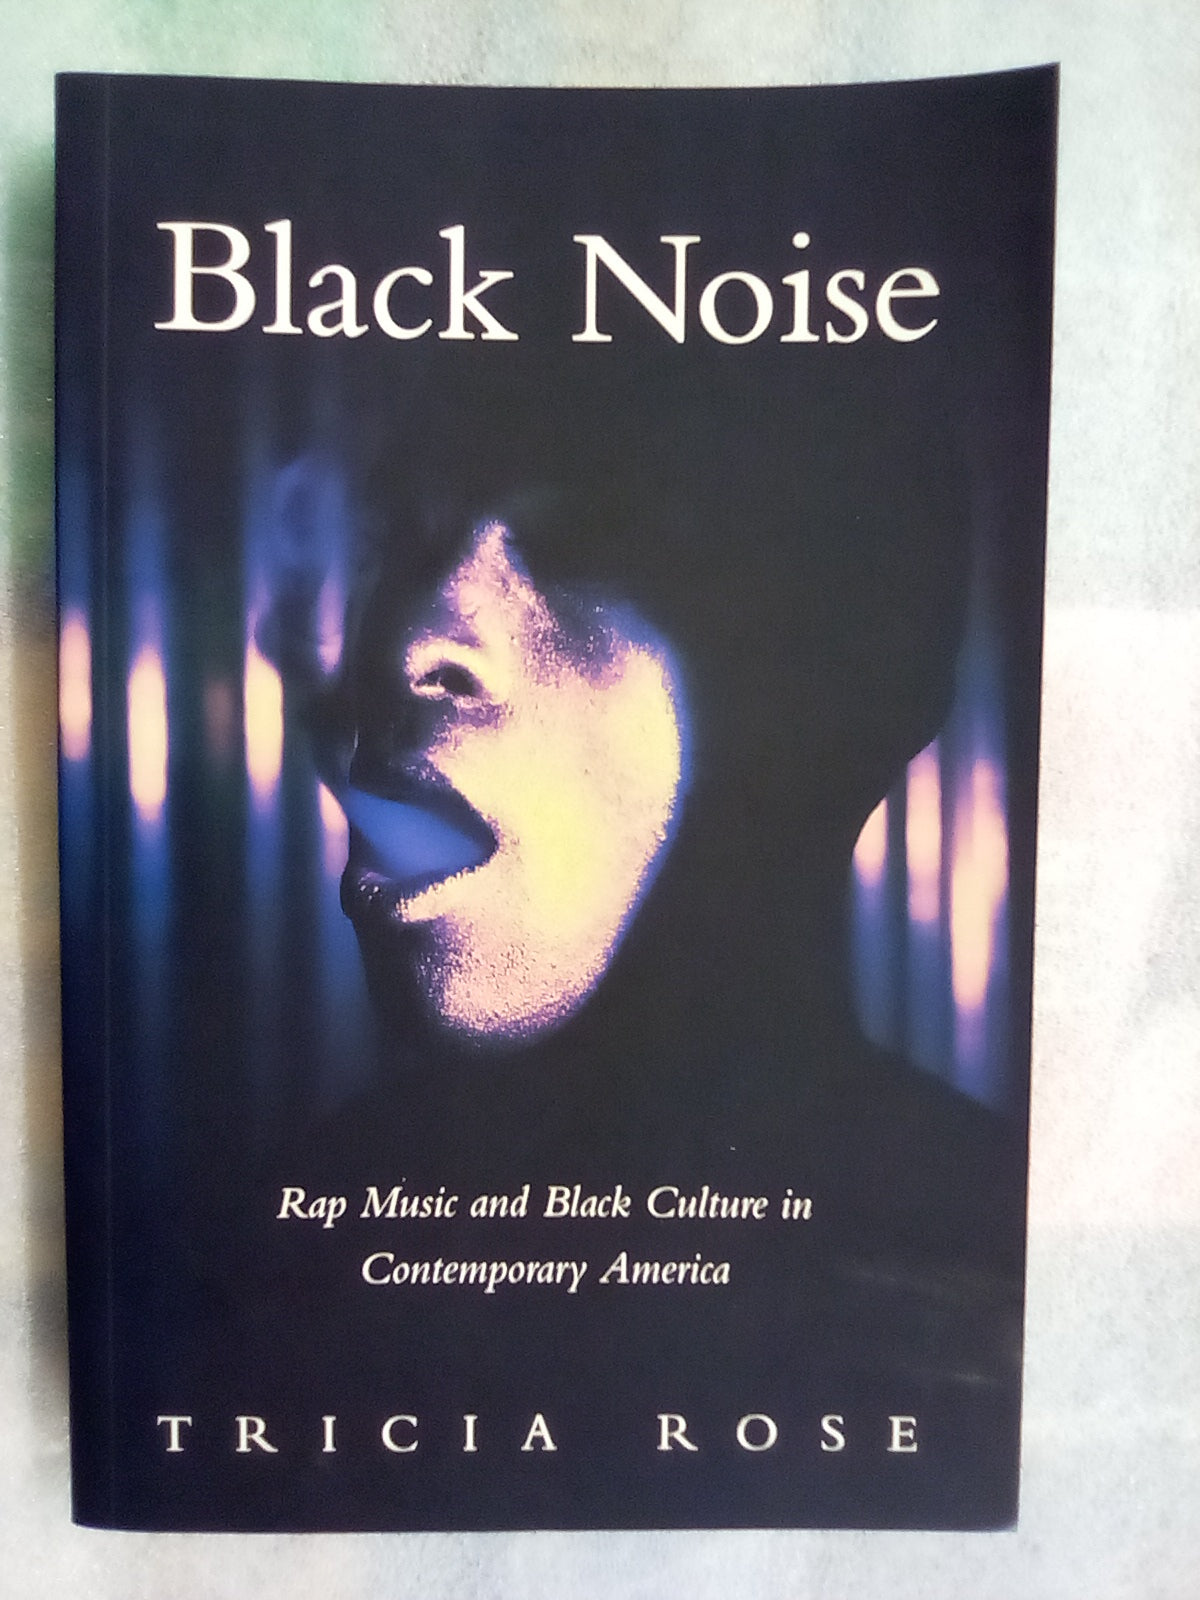 Black Noise - Rap Music and Black Culture in Contemporary America by Tricia Rose